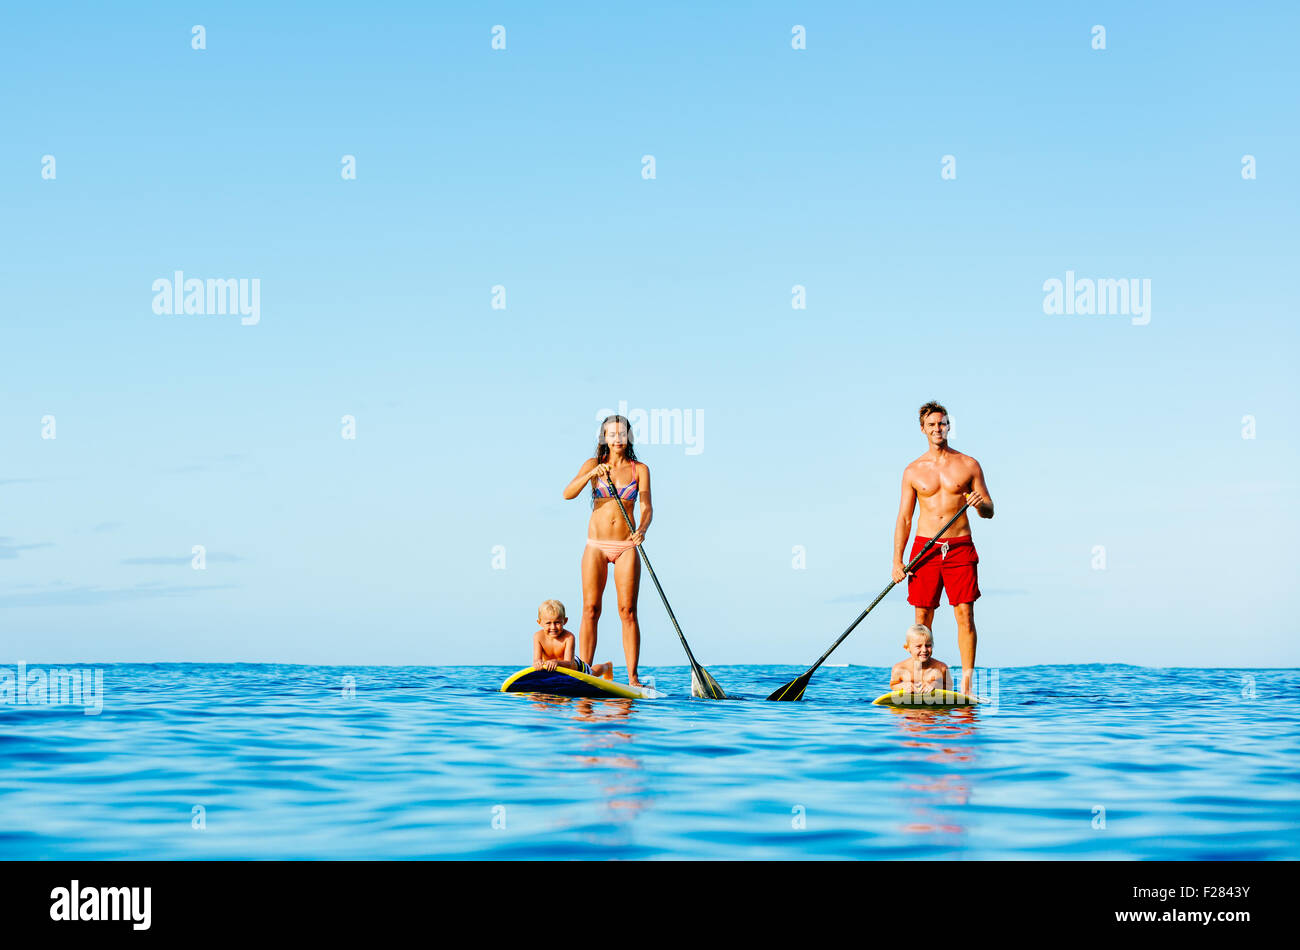 Family Having Fun Stand Up Paddling Together in the Ocean on Beautiful Sunny Morning Stock Photo